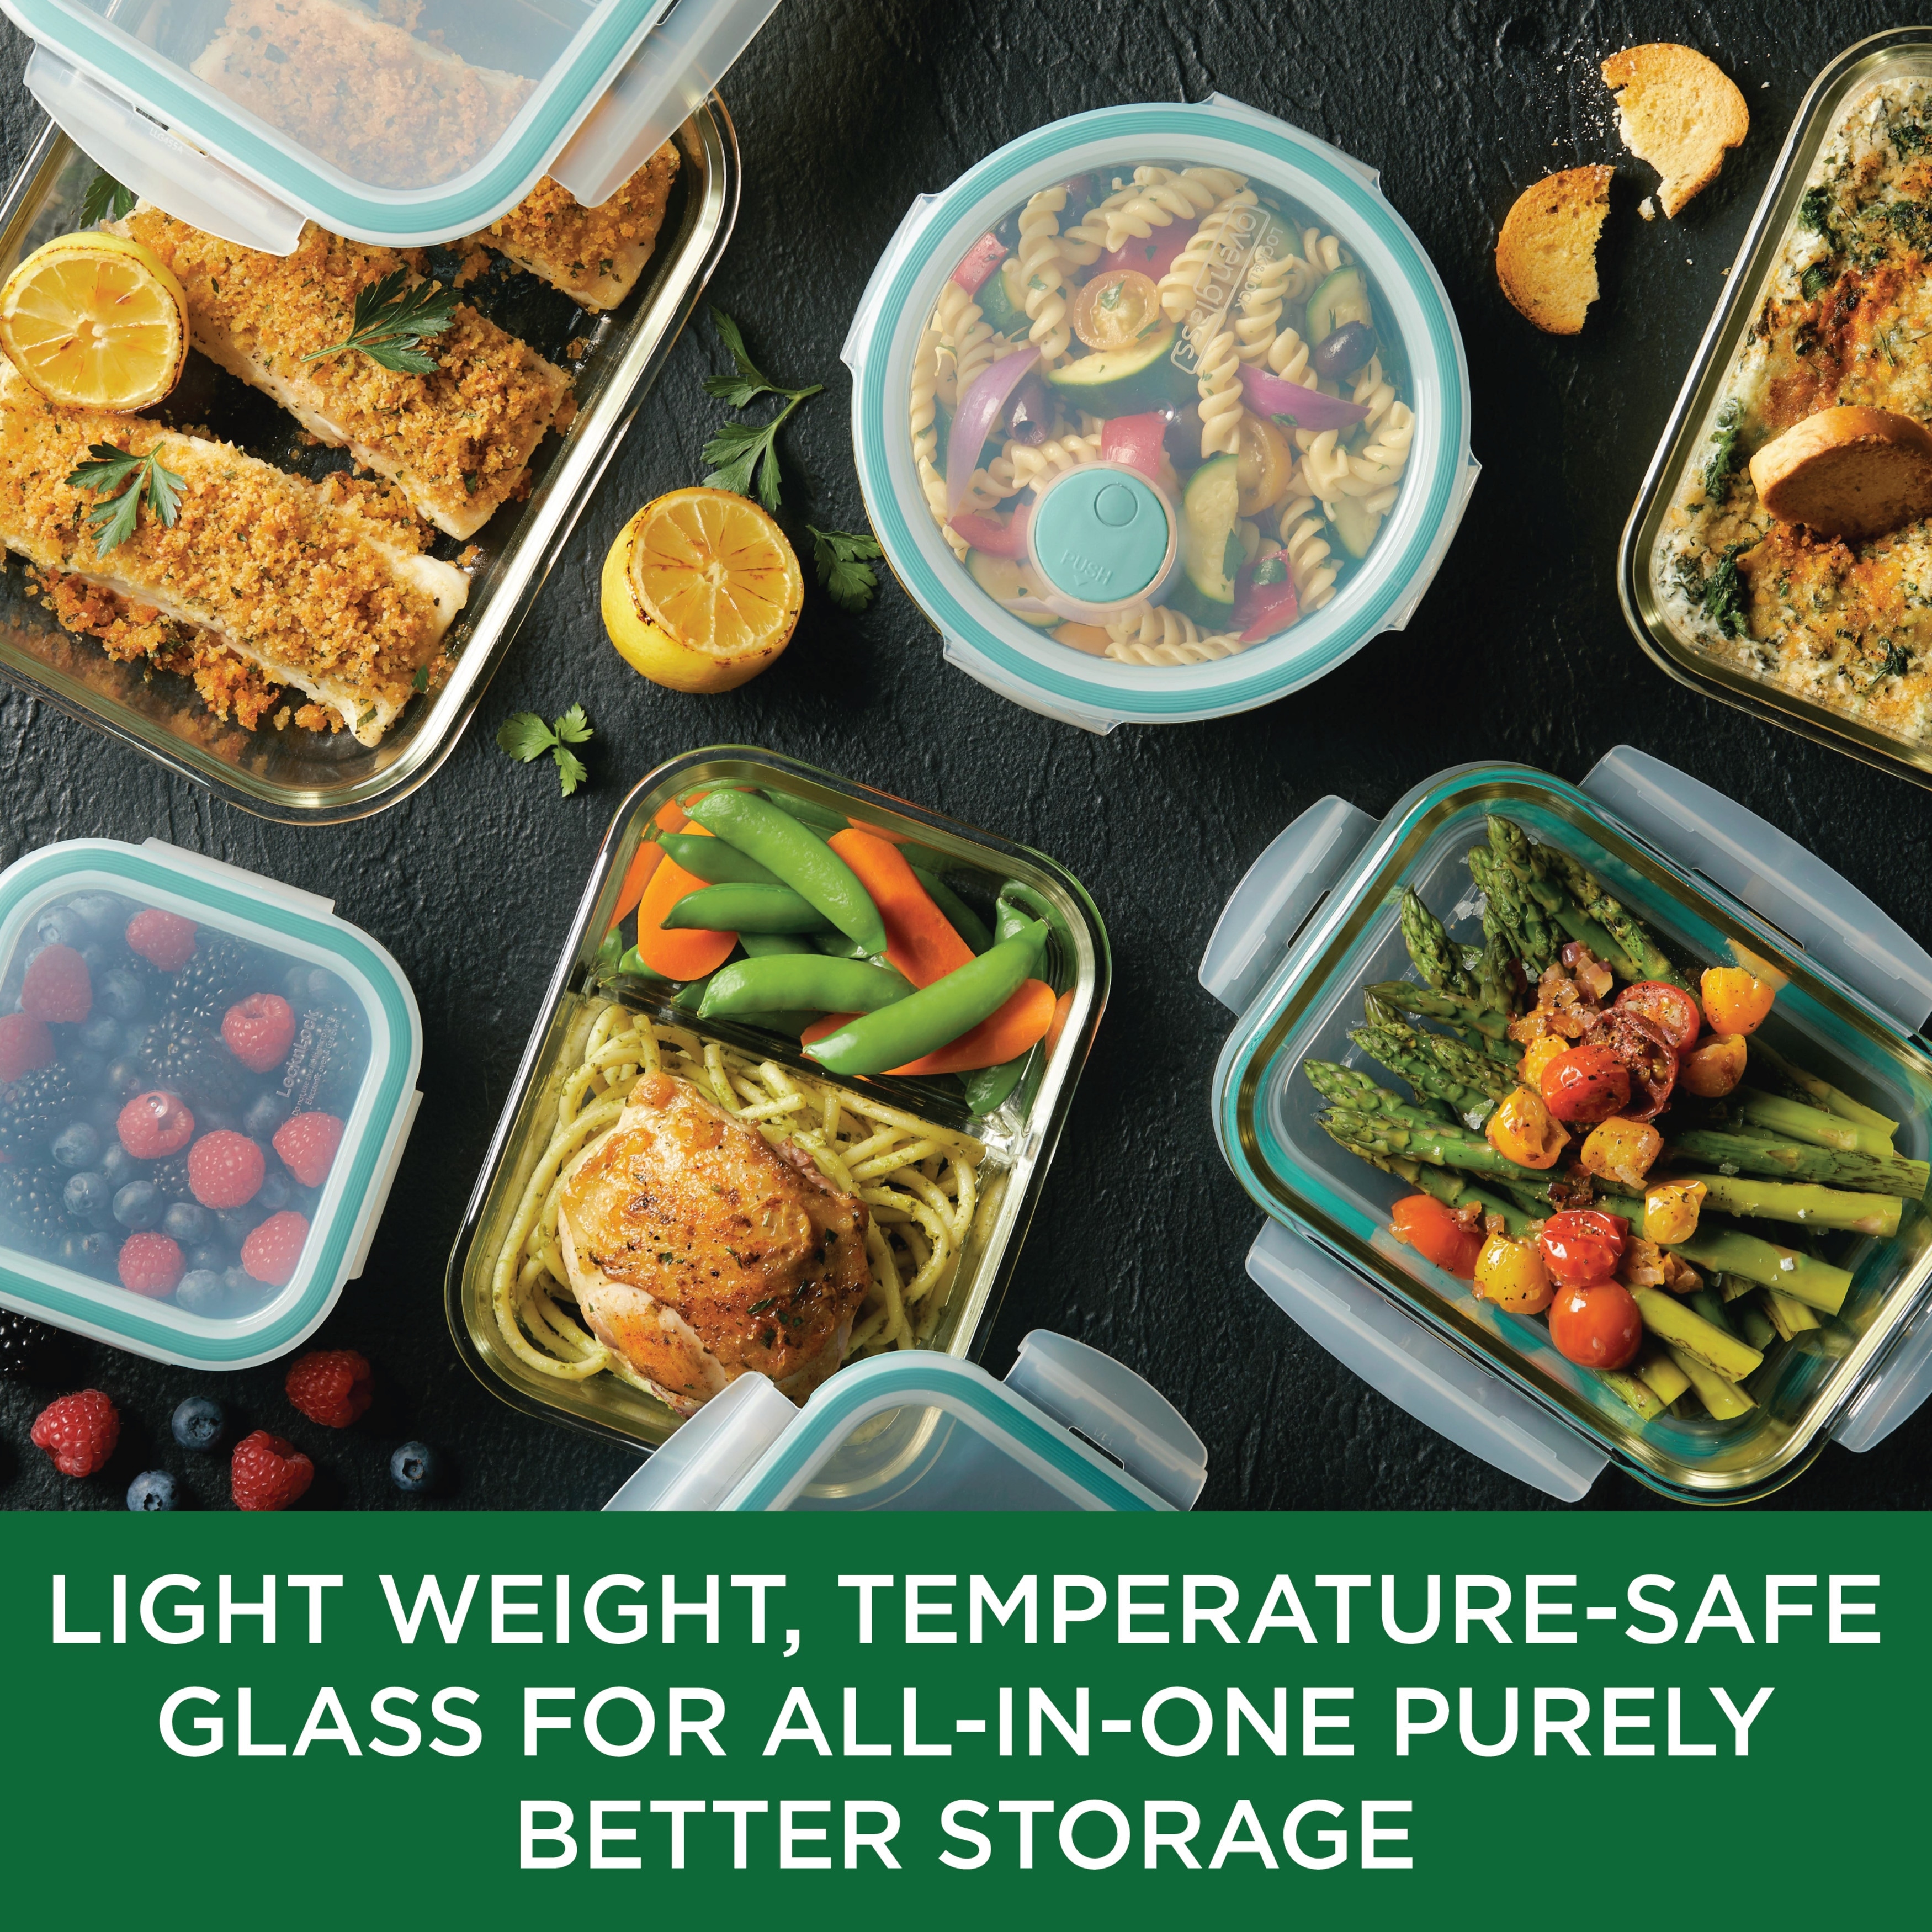 https://ak1.ostkcdn.com/images/products/is/images/direct/c0da490016e70a558f26a2fd3c1b4a79493084b8/LocknLock-Purely-Better-Glass-Divided-Rectangular-Food-Storage-Containers%2C-25-Ounce%2C-Set-of-Three.jpg